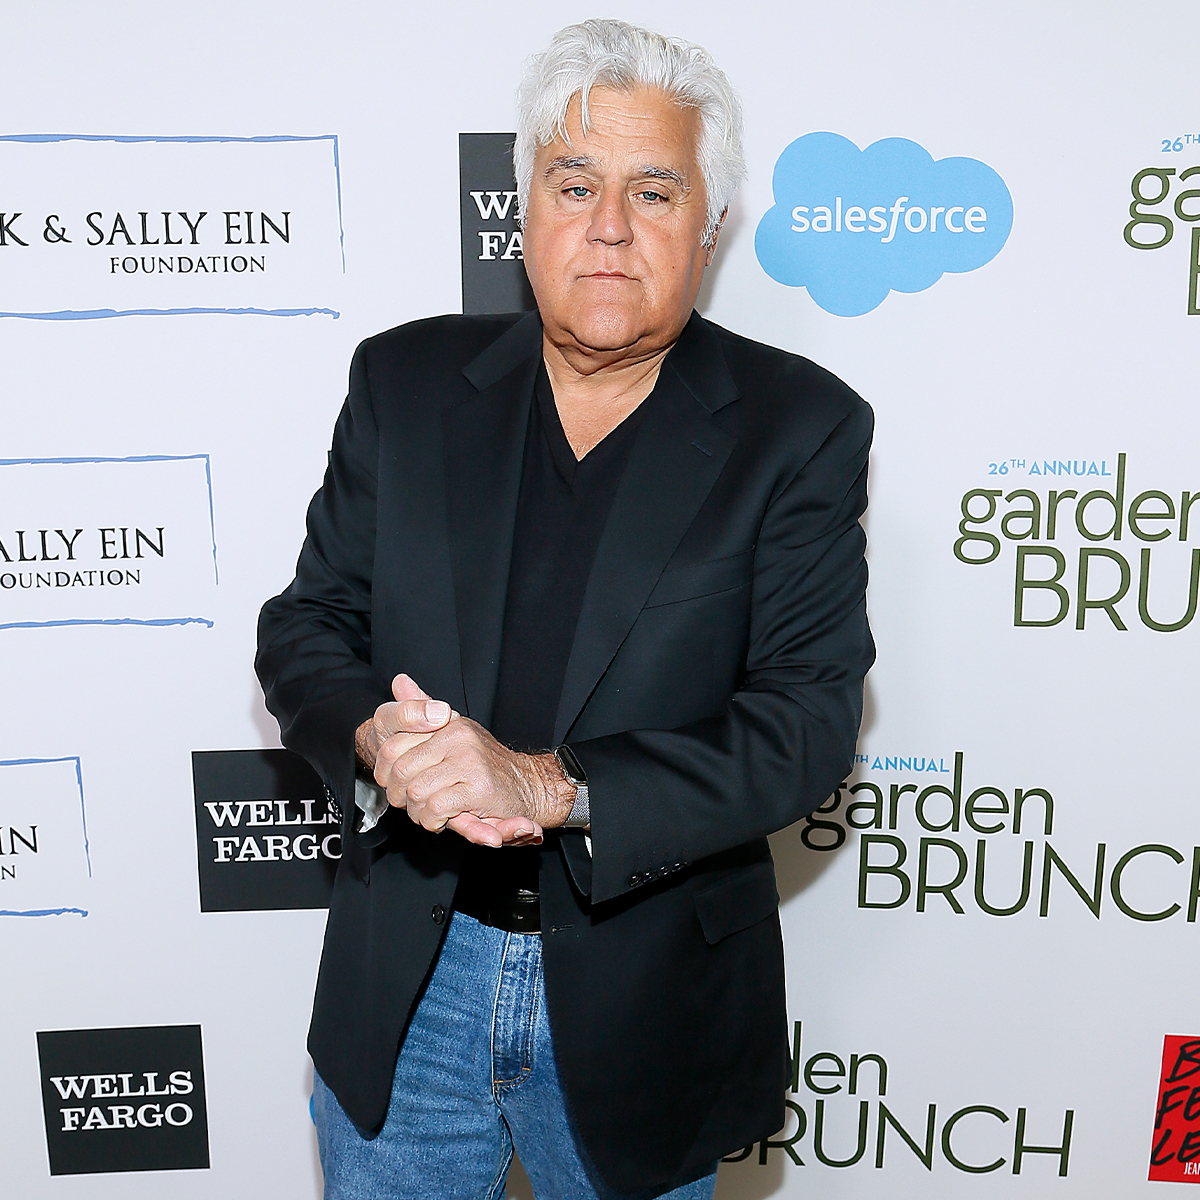 Jay Leno Breaks Collarbone and Ribs in Motorcycle Accident 2 Months After Suffering Severe Burns - E! NEWS